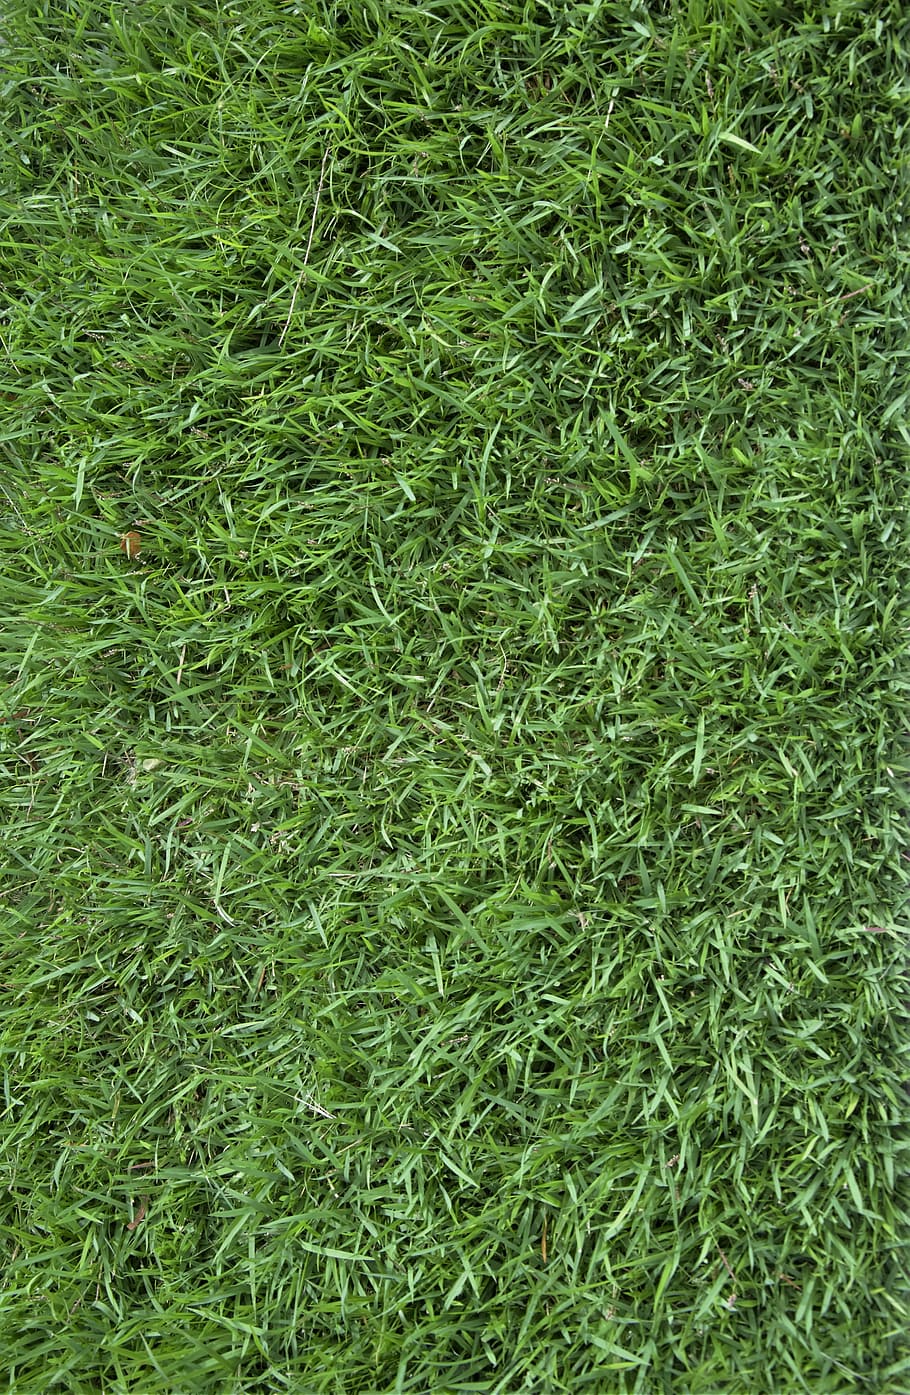 grass, texture, background, green grass, green color, full frame, plant, backgrounds, growth, field